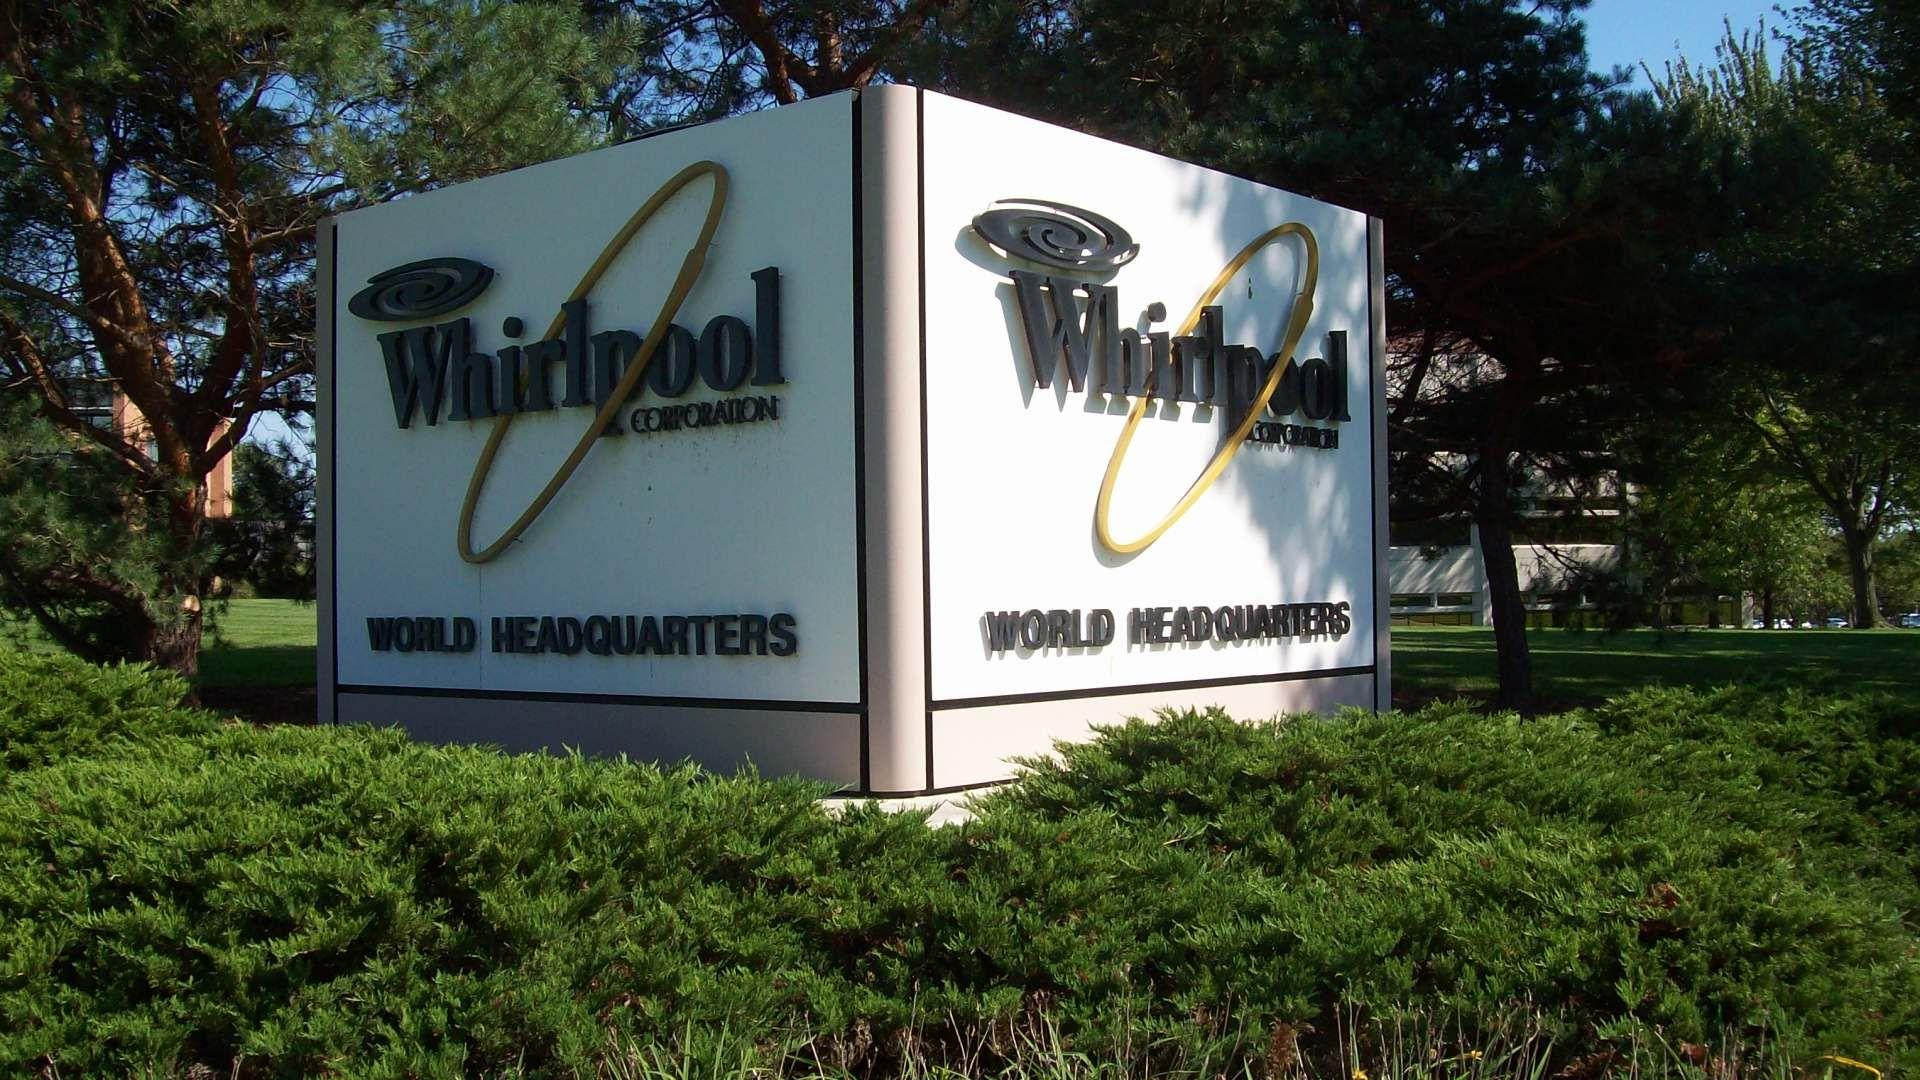 Whirlpool Corporation Logo - US Signcrafters Whirlpool Corporate Headquarters - US Signcrafters